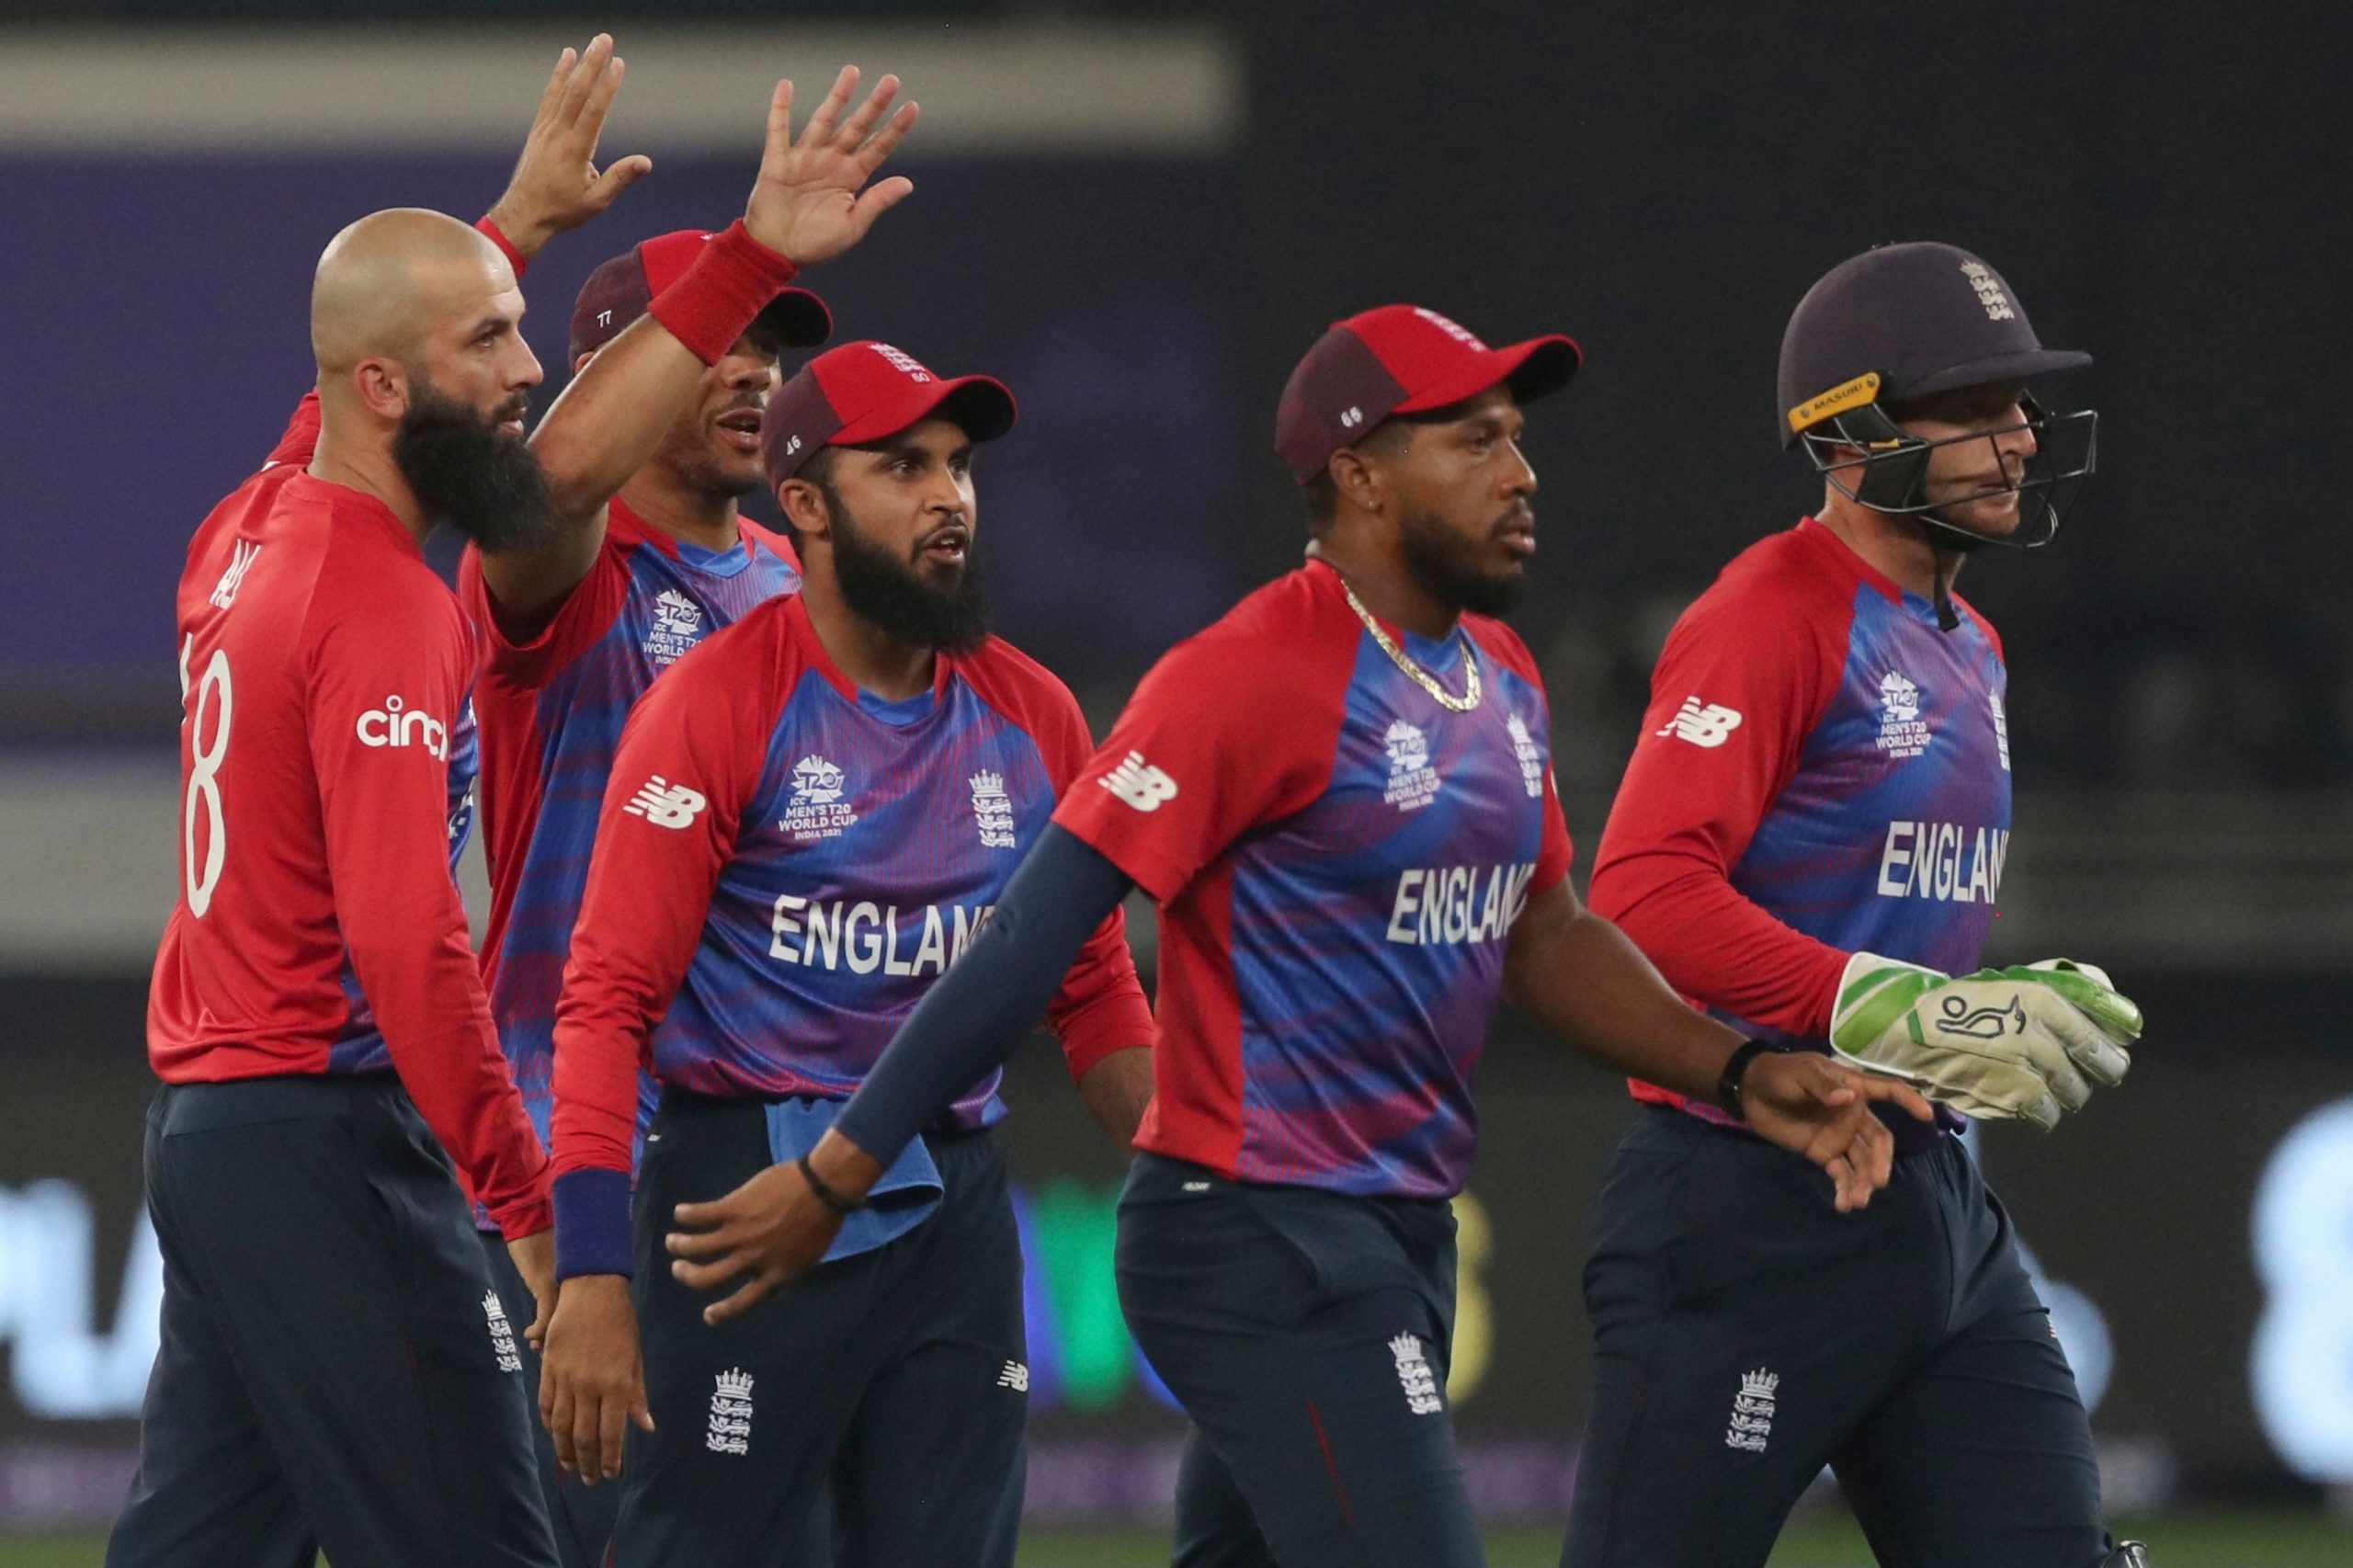 T20 World Cup: With an eye on semifinals berth, England take on Sri Lanka